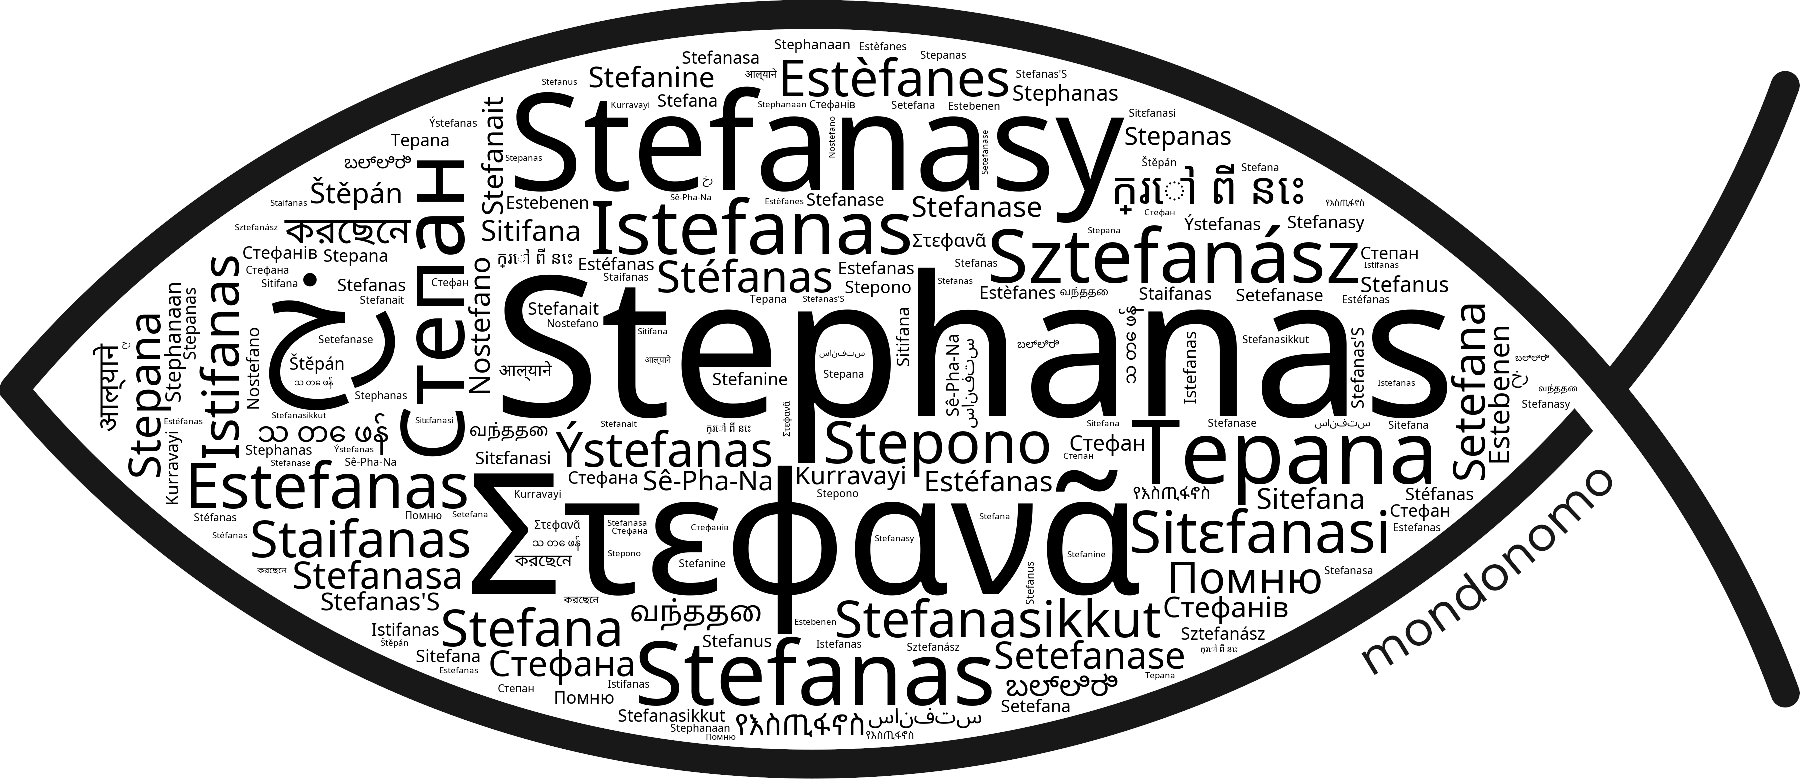 Name Stephanas in the world's Bibles